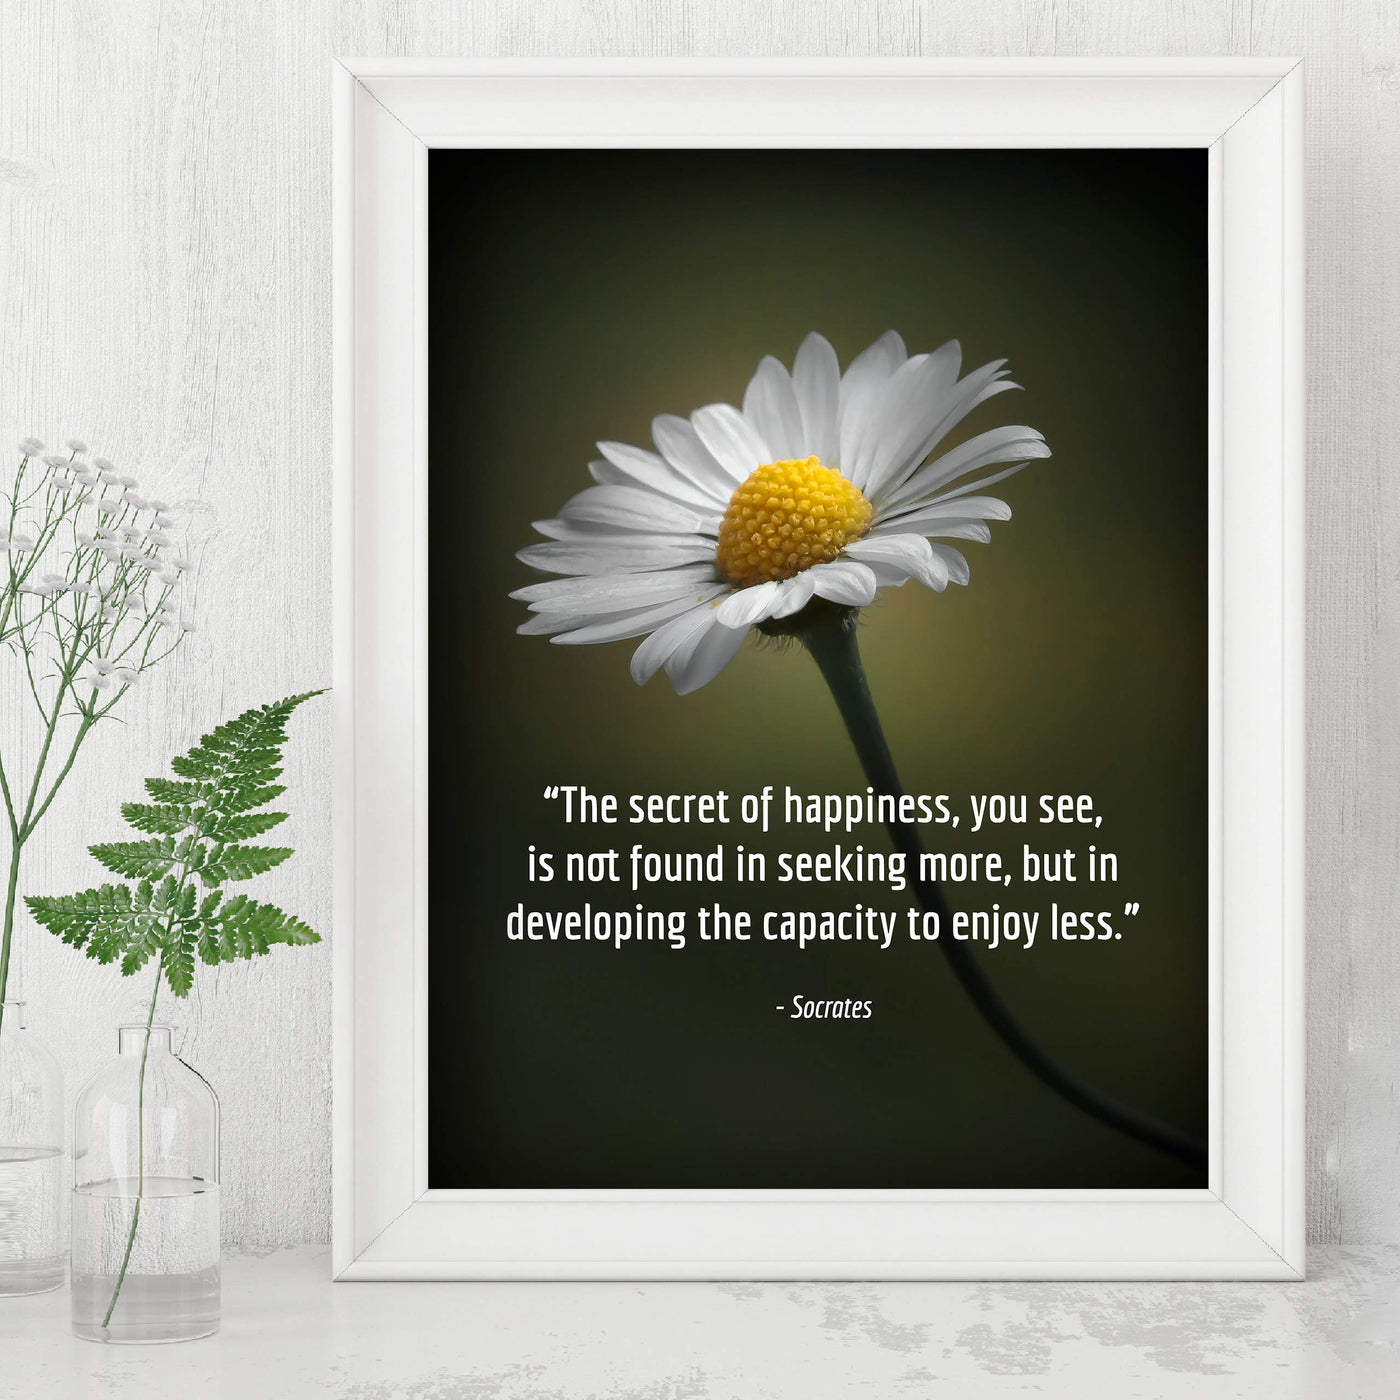 Socrates Quotes Wall Art-"Secret To Happiness-Developing Capacity to Enjoy Less" -8 x 10" Motivational Wall Print-Ready to Frame. Modern Typographic Design. Inspirational Home-Office-School Decor.